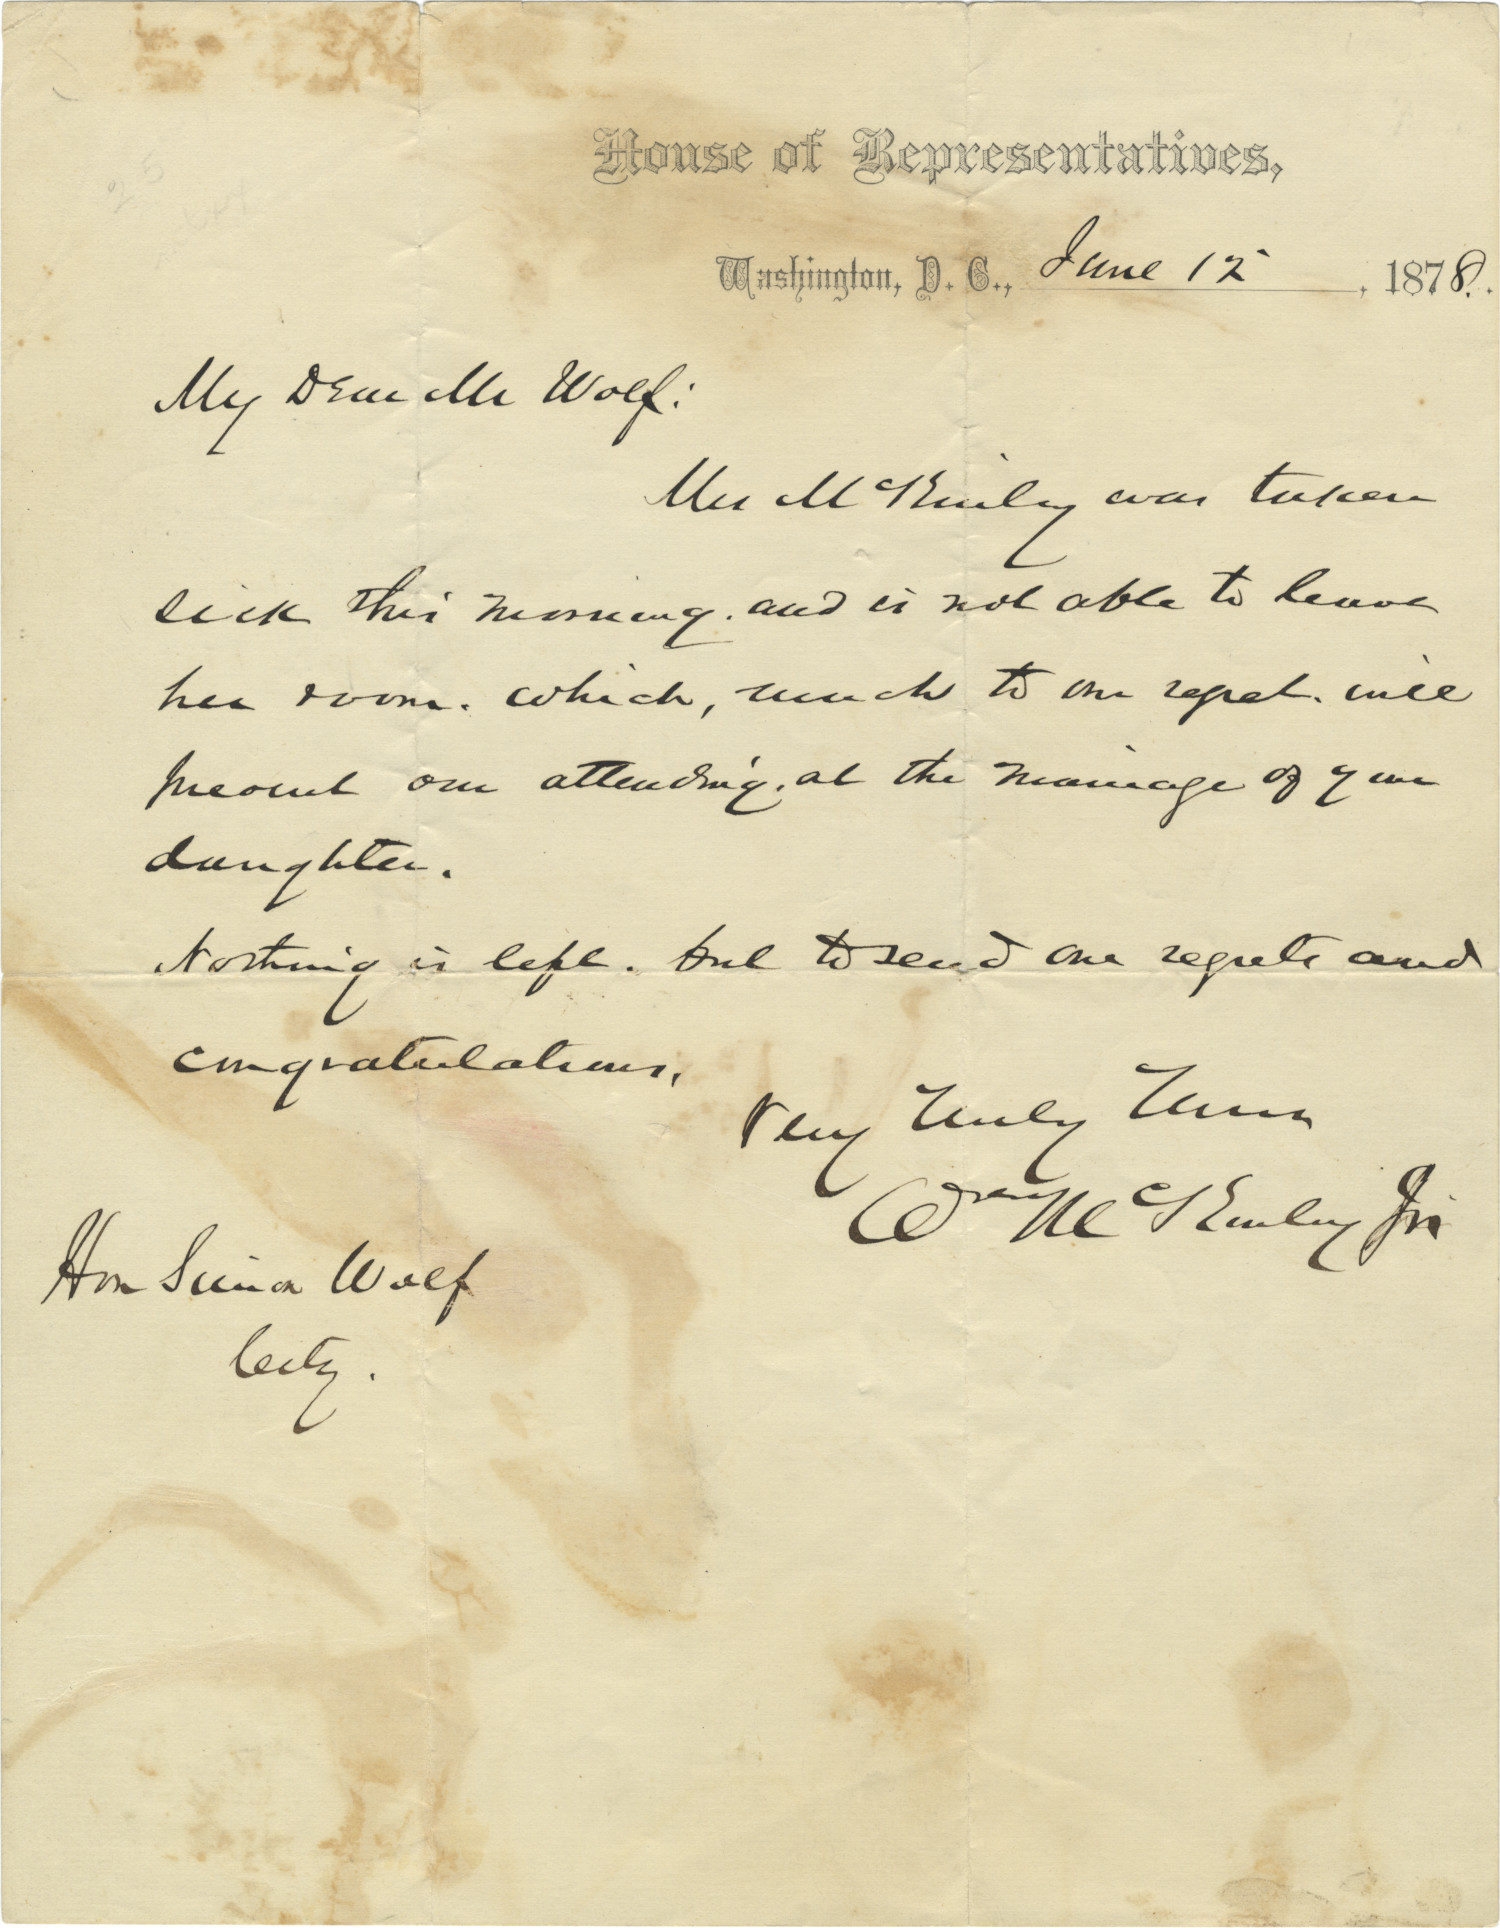 Young Congressman McKinley Regrets He is Unable to Attend Wedding of Simon Wolf’s Daughter: Mrs. McKinley Is Ill